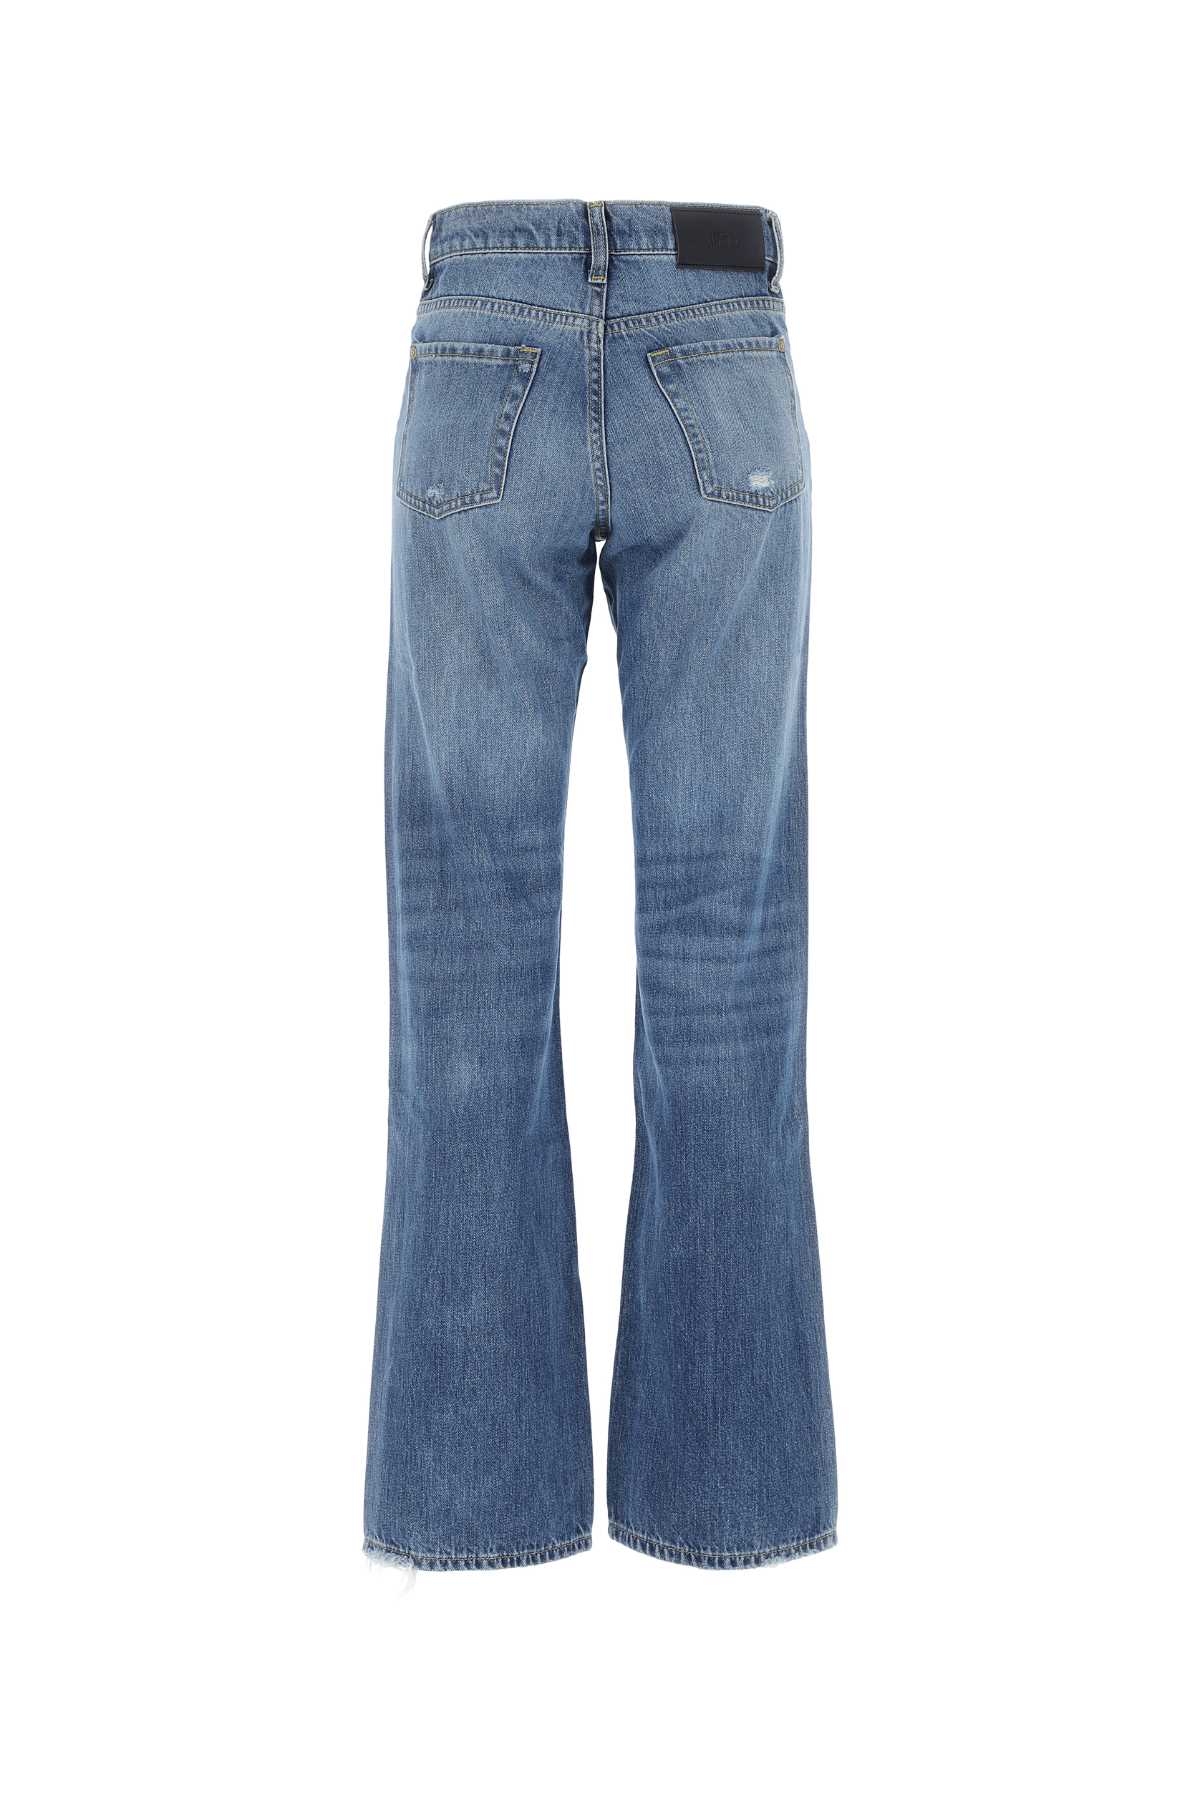 7 For All Mankind Denim Tess Jeans In Rain